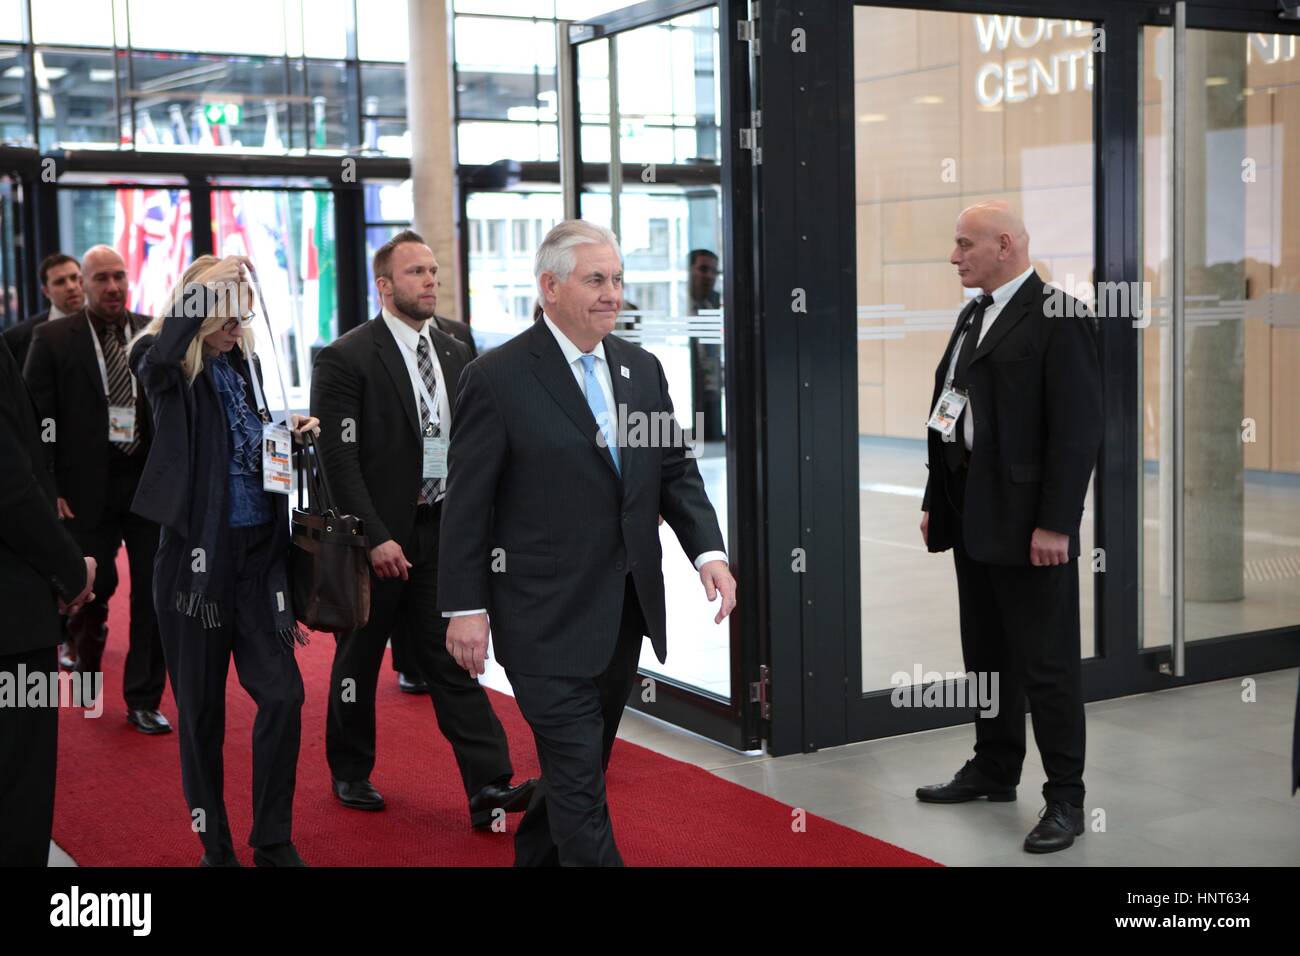 U.S. Secretary of State Rex Tillerson arrives at the World Conference Center Bonn to participate in the G-20 Foreign Ministers Meeting February 16, 2017 in Bonn, Germany.     (Glen Johnson/U.S. State Department via Planetpix) Stock Photo